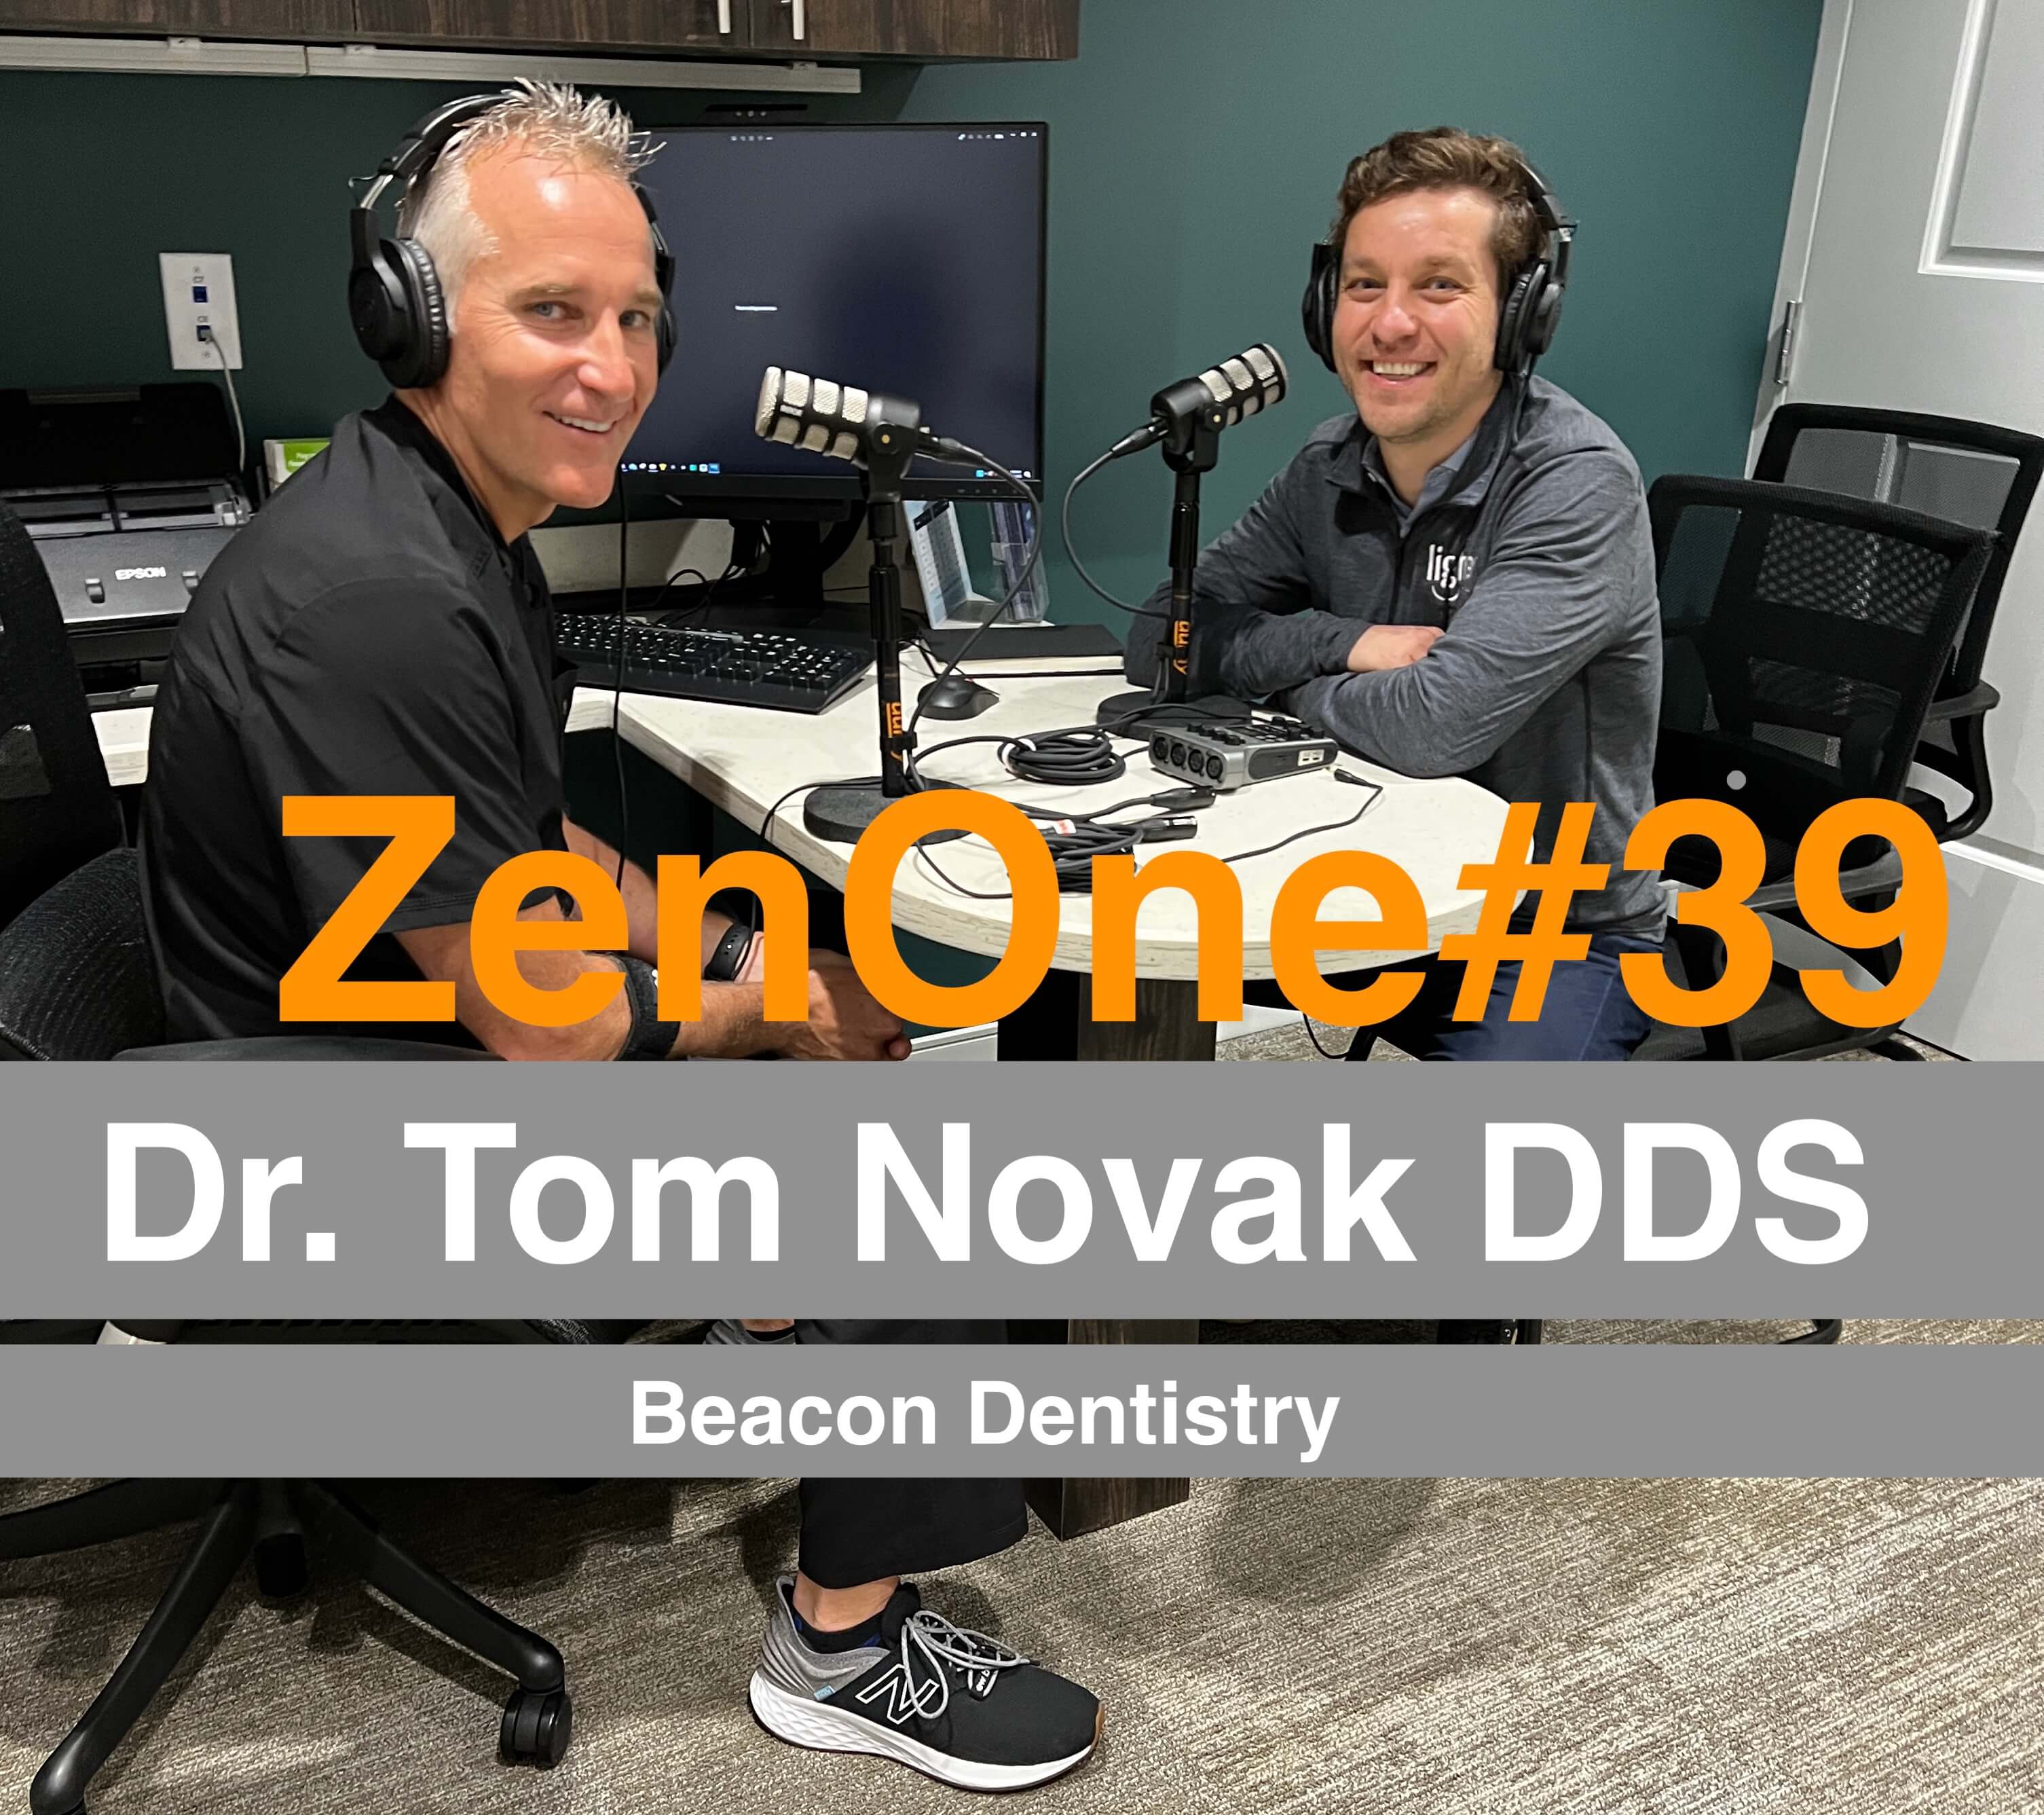 Episode #39 Dr. Tom Novak, DDS from 7 ops 2200SF to 12ops 4000SF building, best parenting advice, and 2 simple rules to a happy life